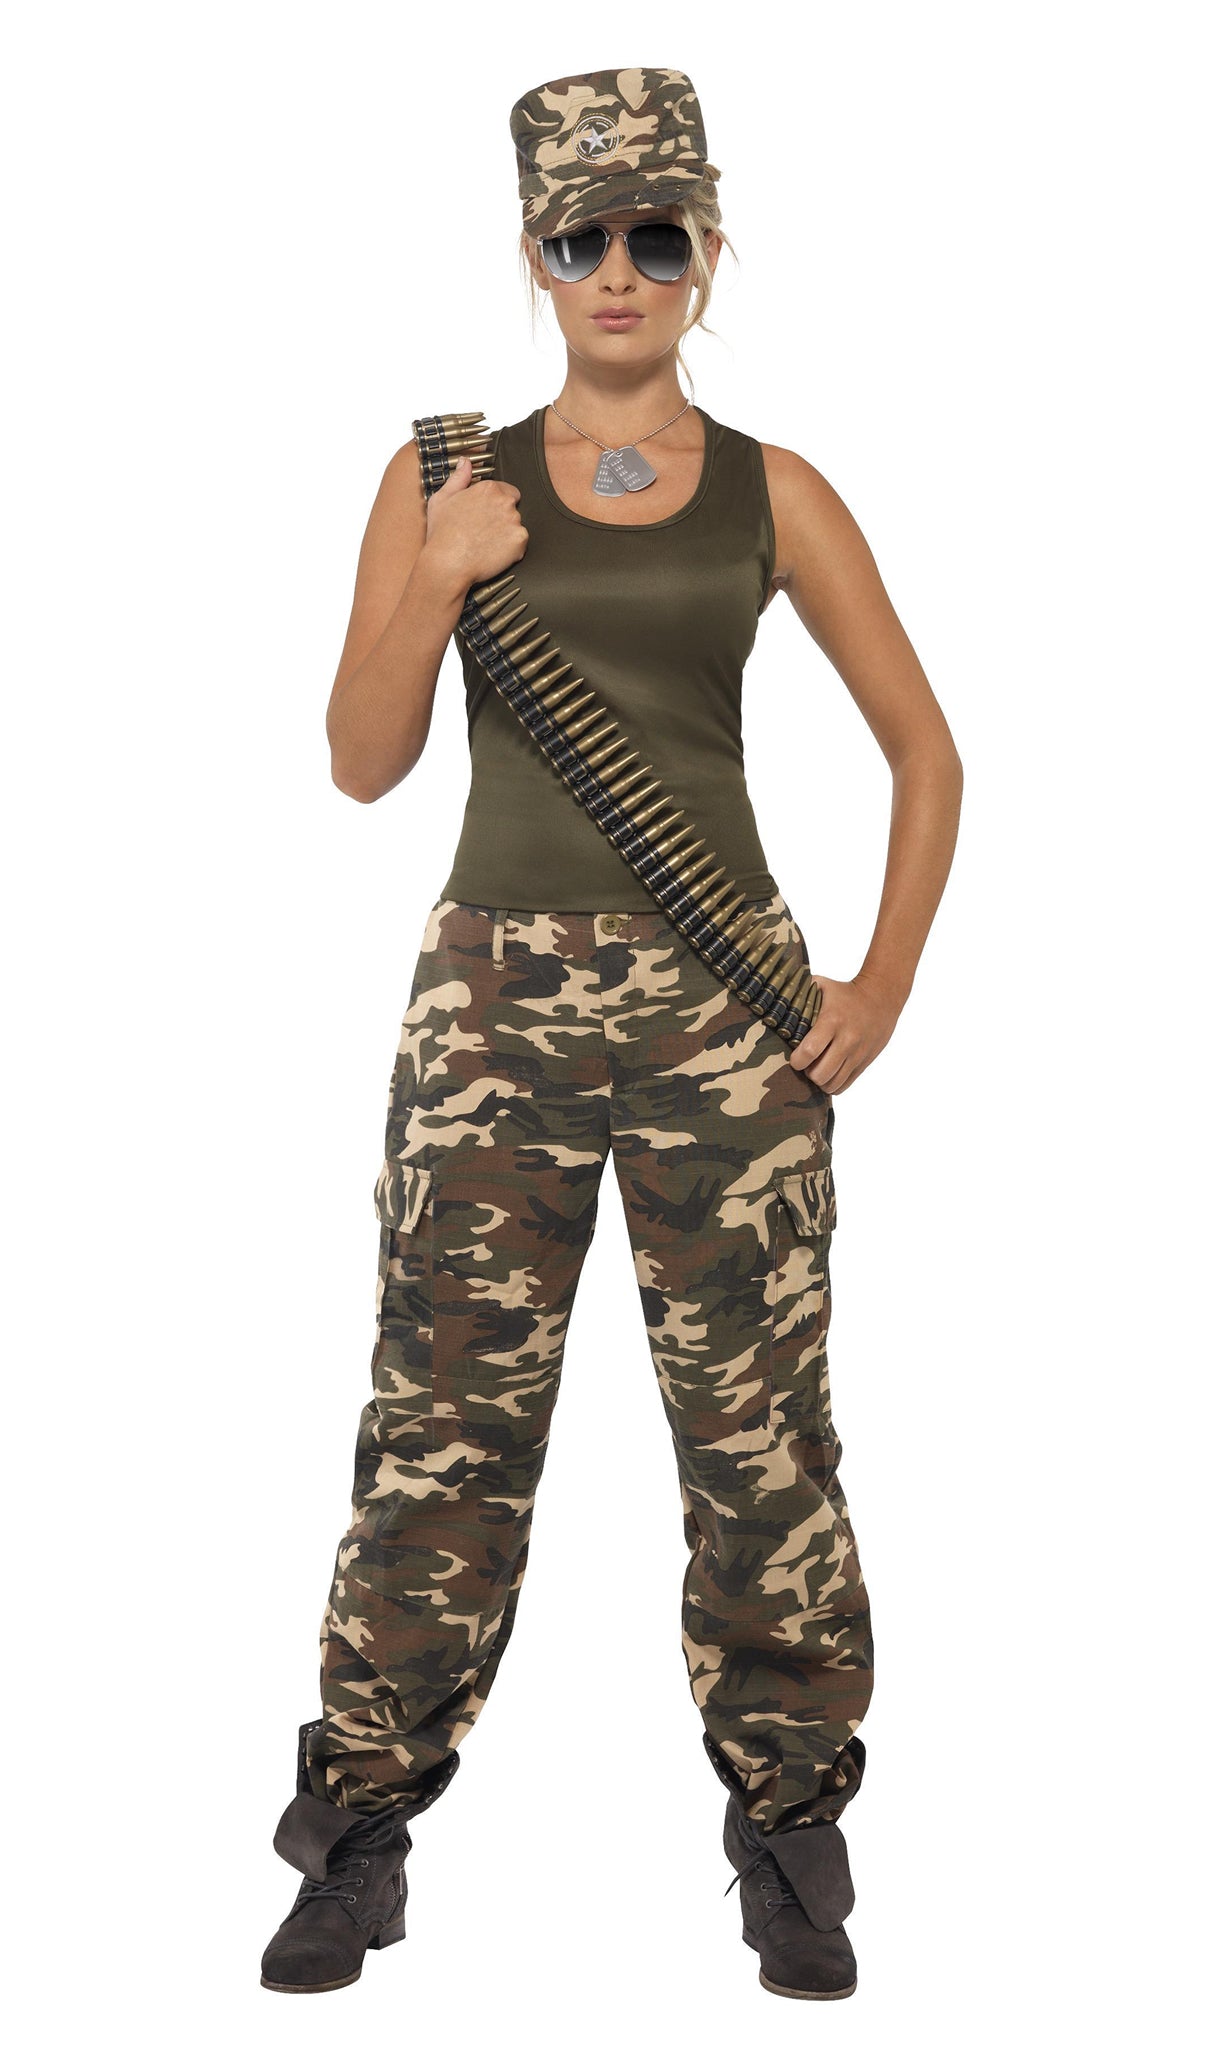 Woman's camouflage  pants with hat and green top